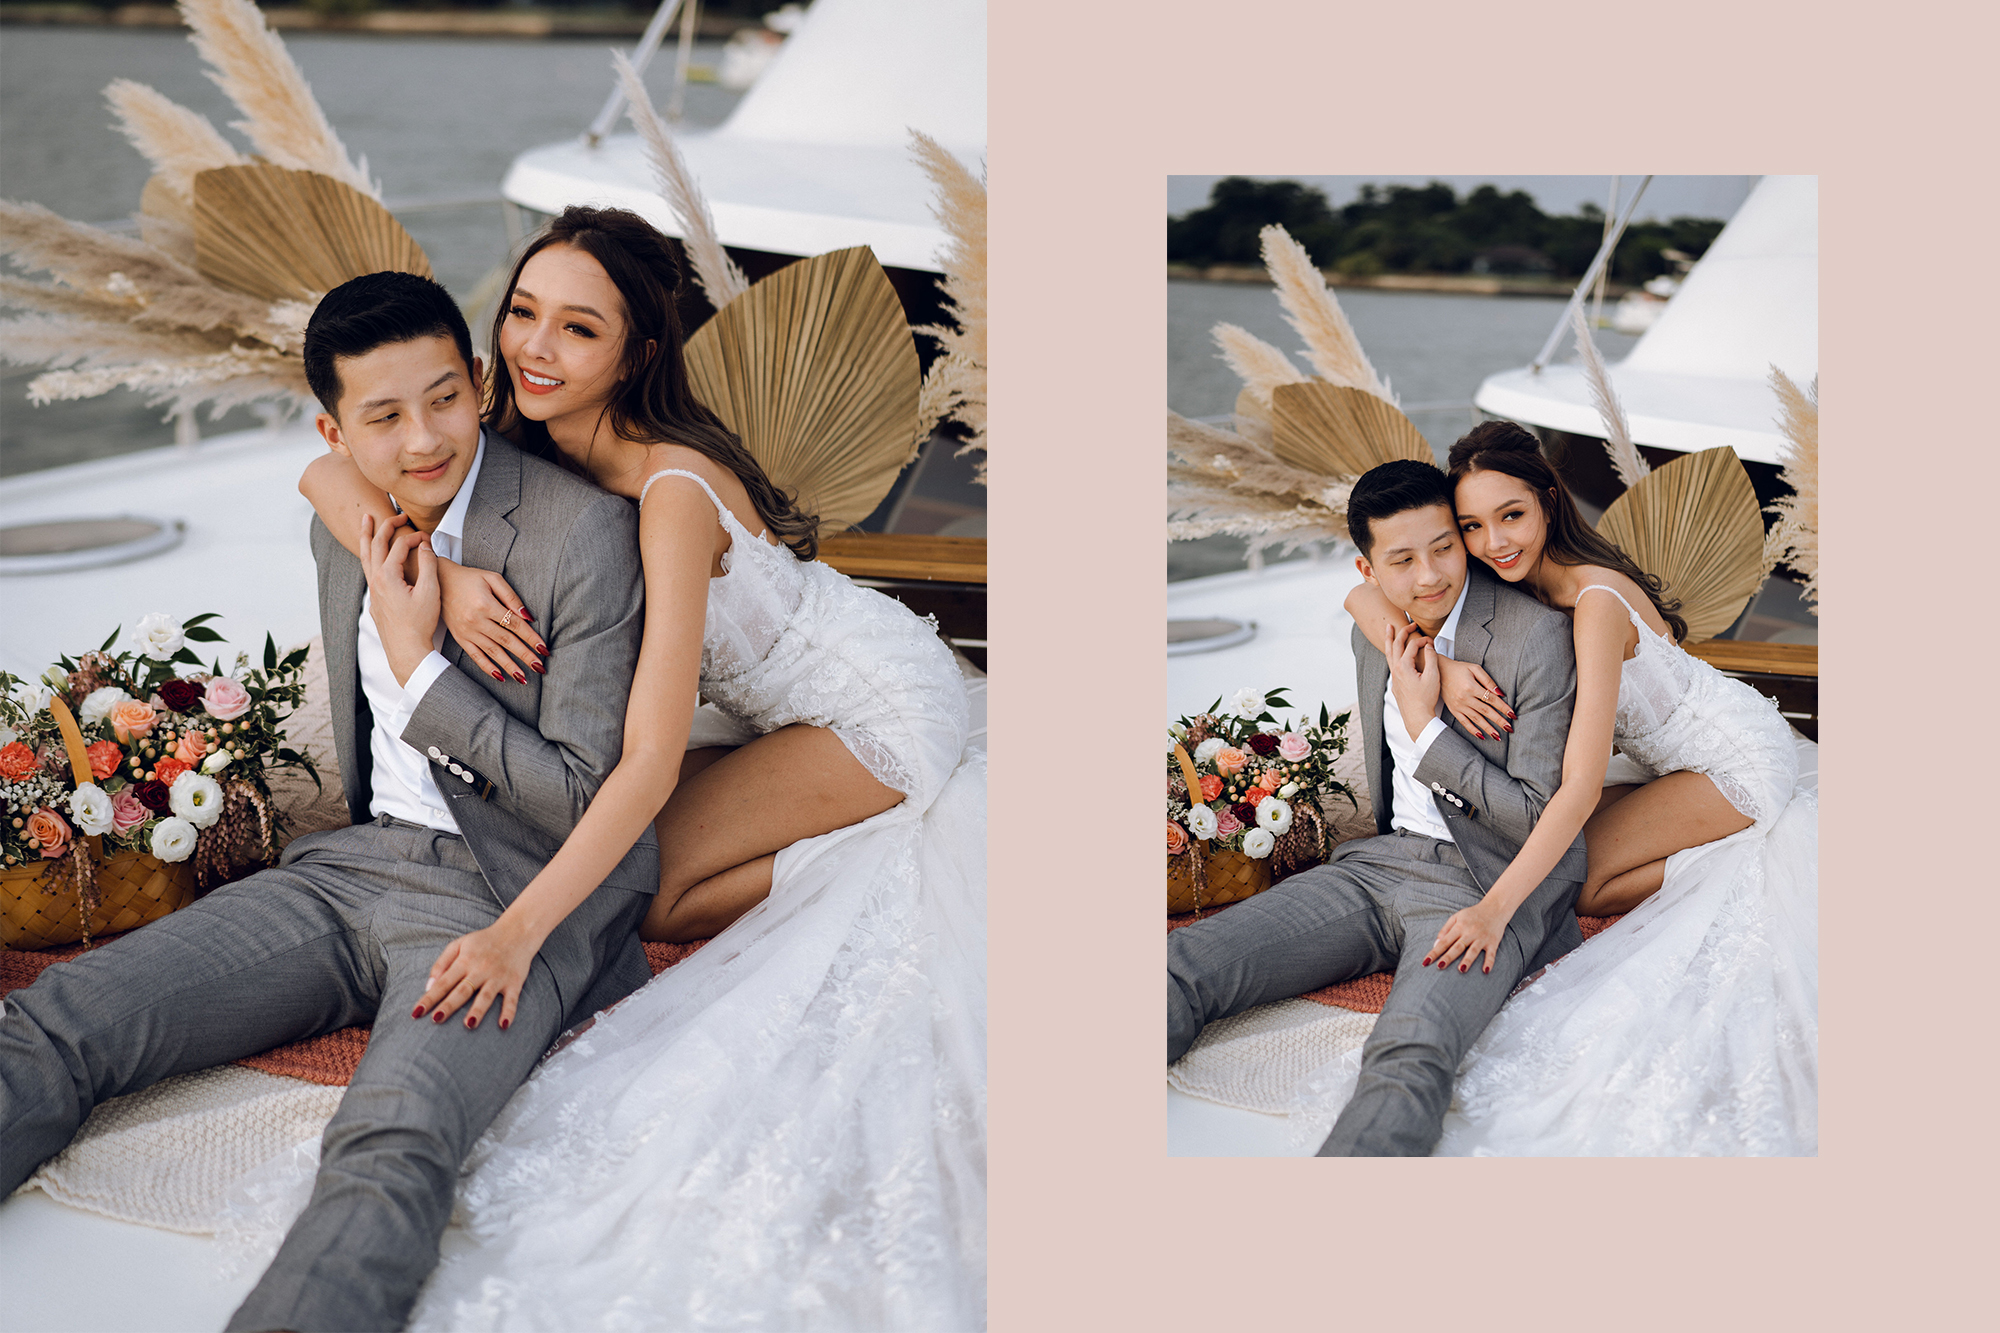 Sunset Prewedding Photoshoot On A Yacht With Romantic Floral Styling by Samantha on OneThreeOneFour 10